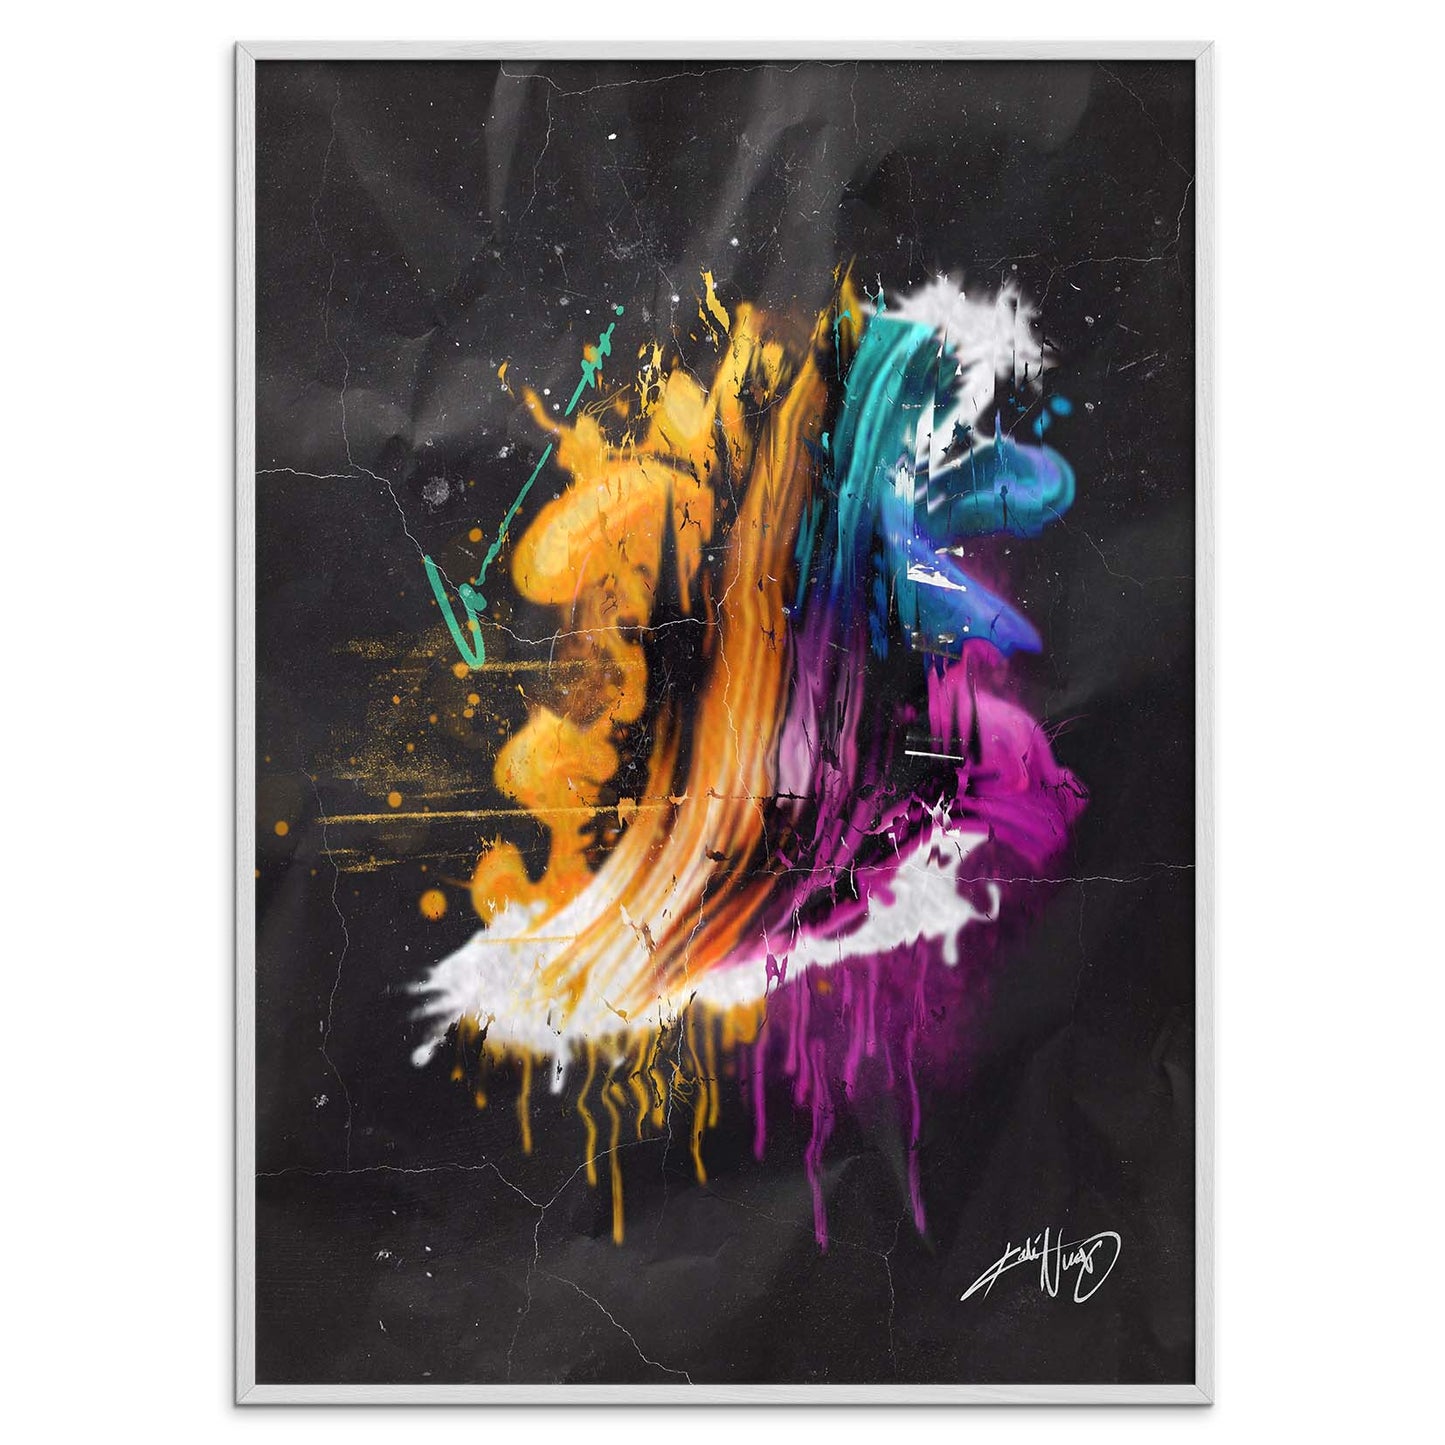 colorful calligraphy abstract art poster in a white frame on a white background